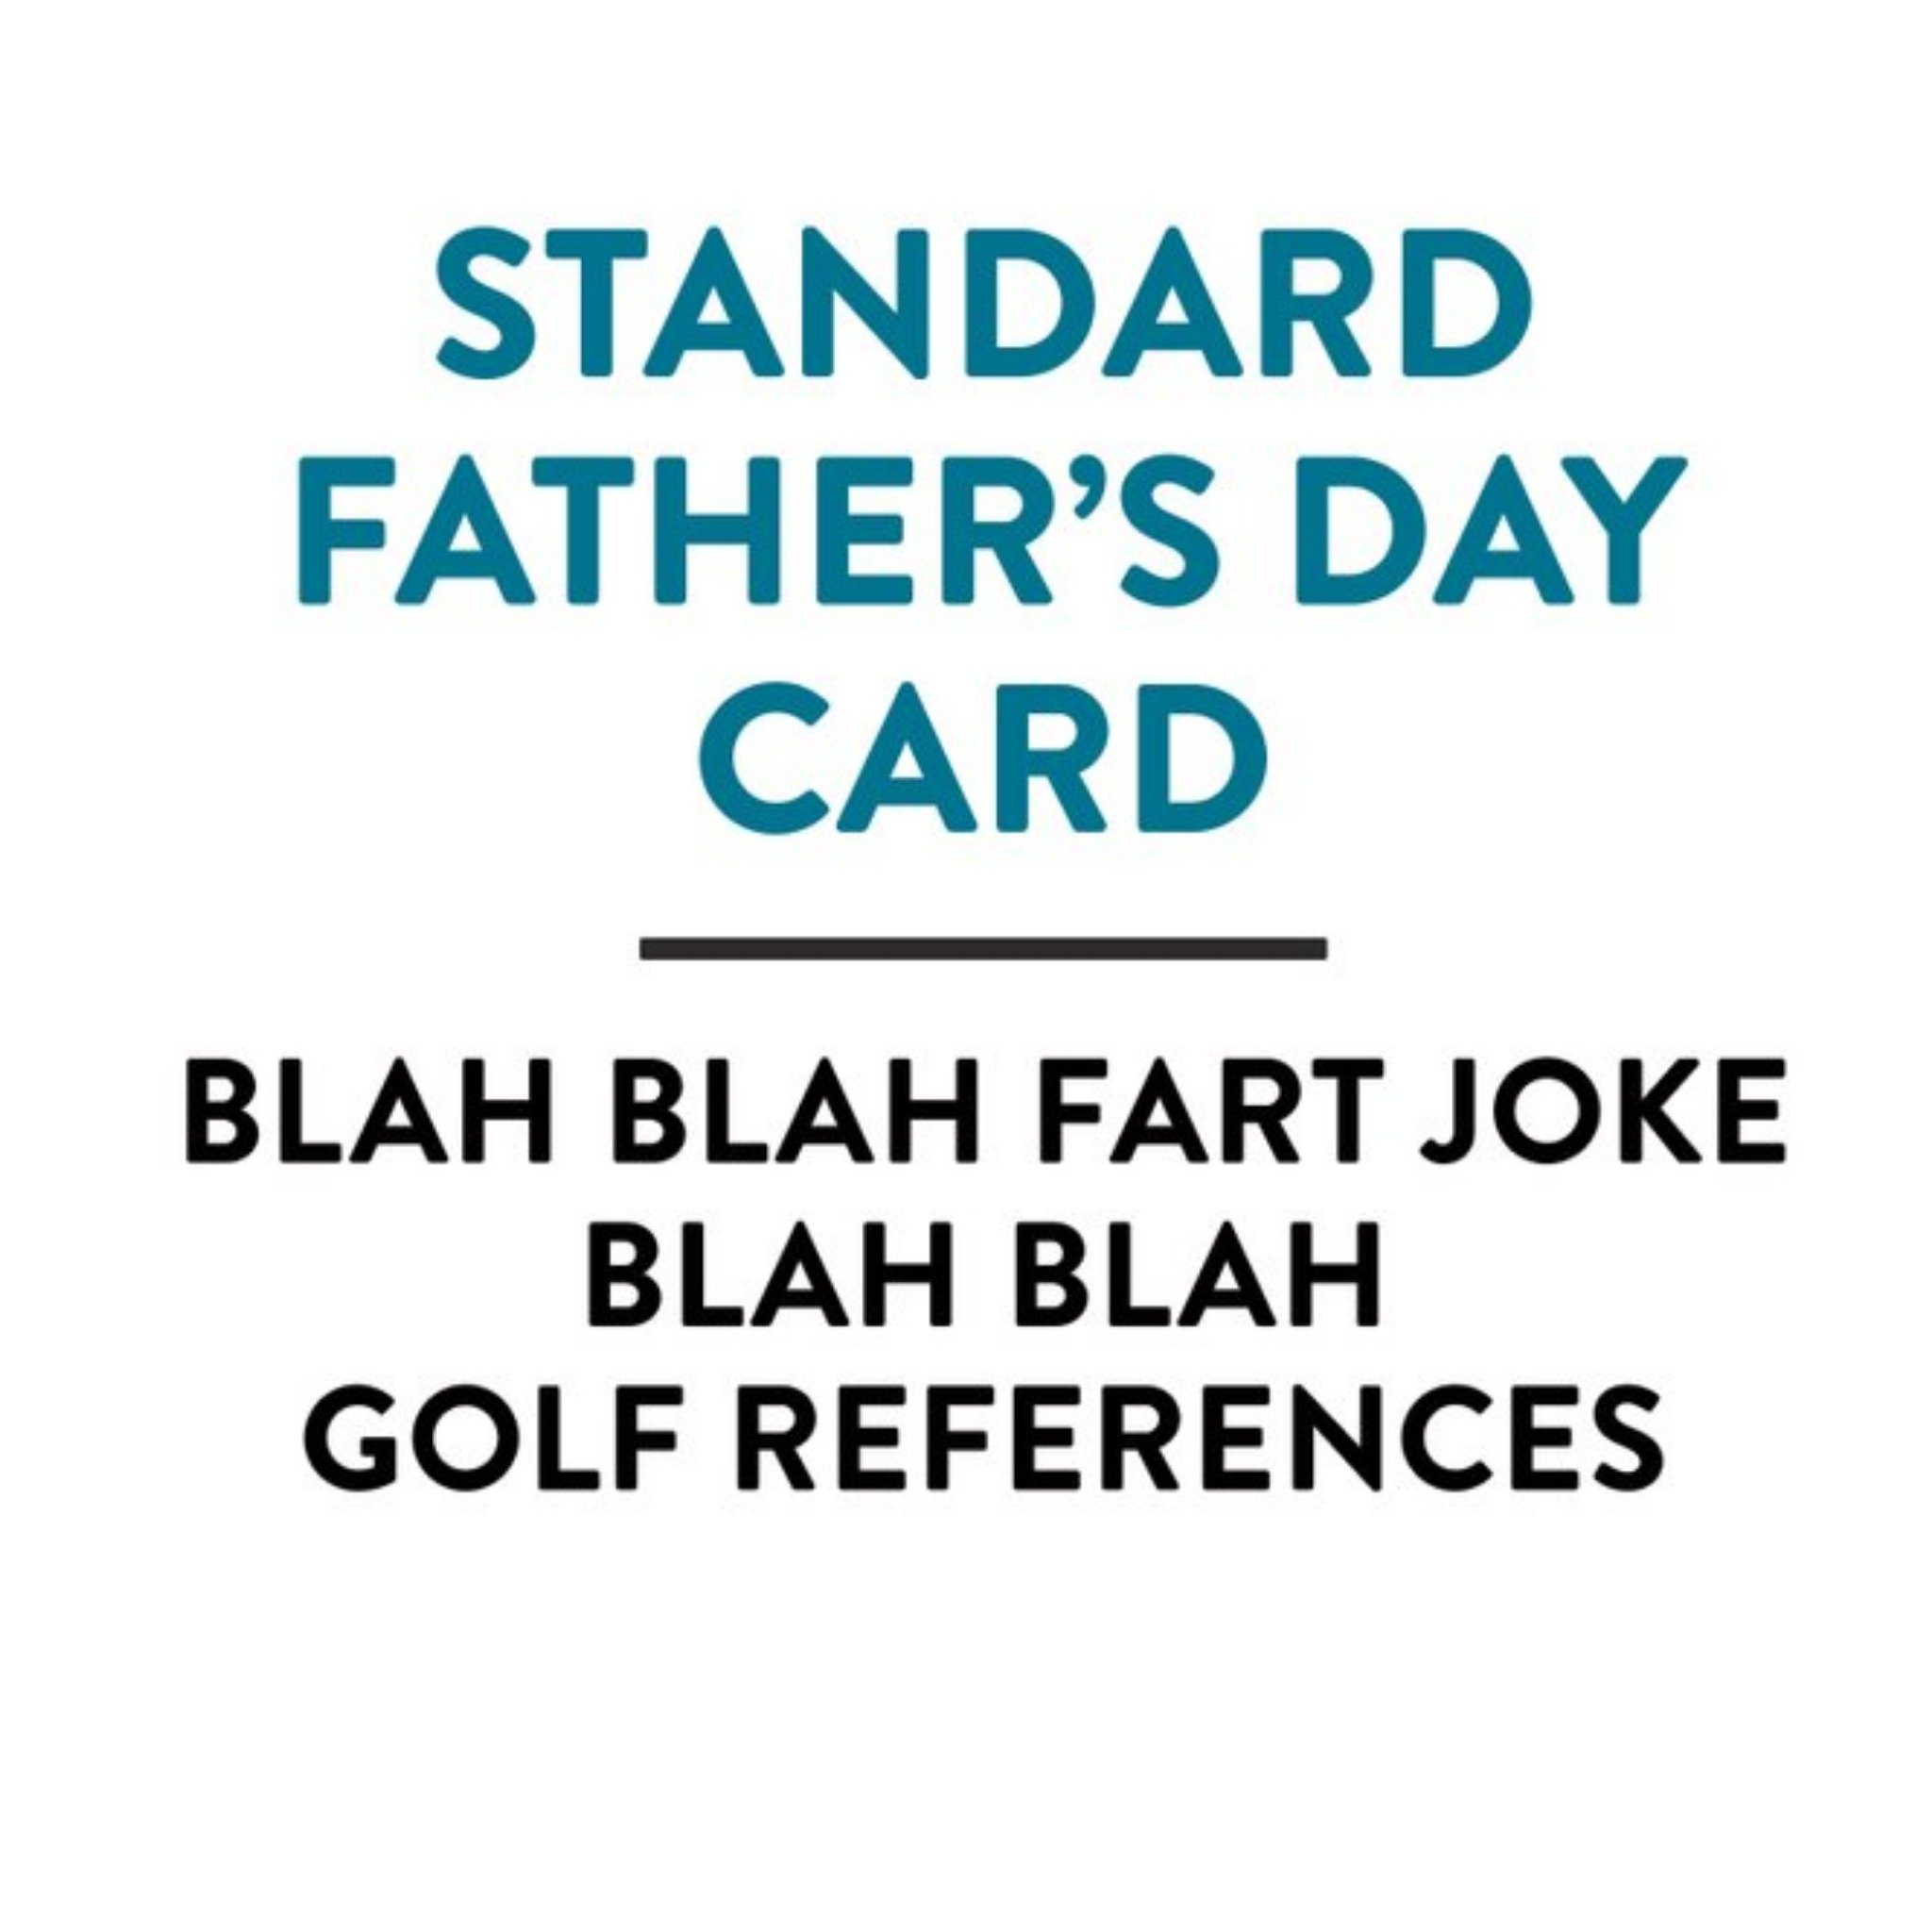 Moonpig Humorous Typography Standard Father's Day Card, Large